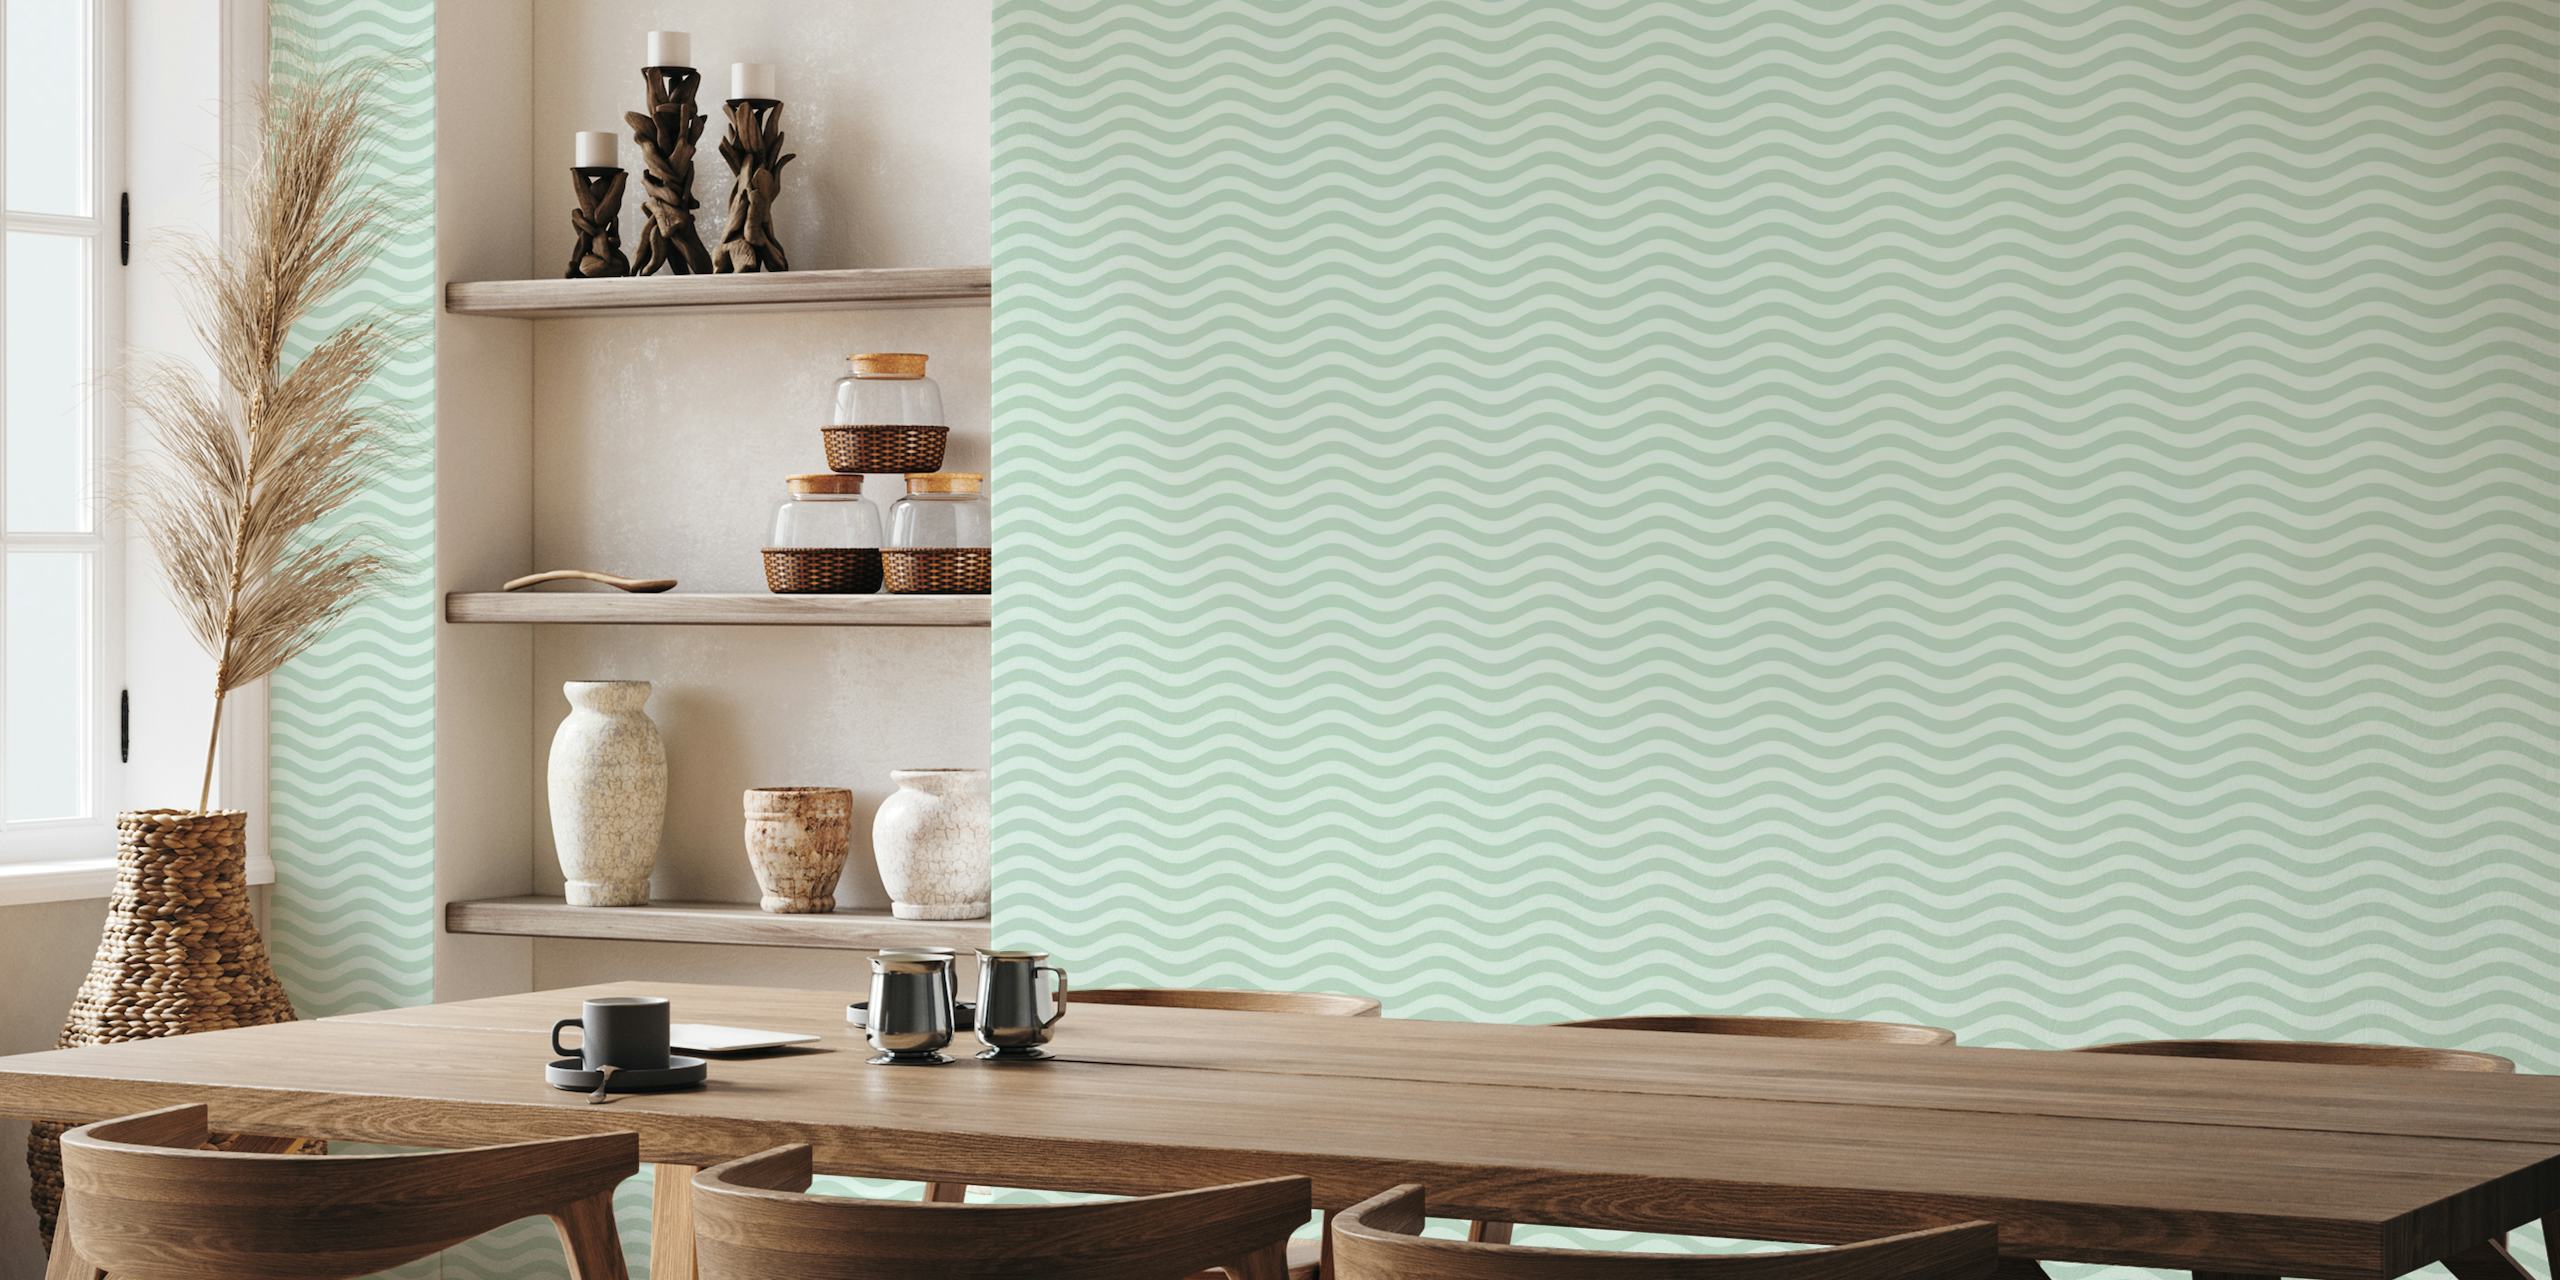 Curly green waves pattern wall mural for tranquil room decor